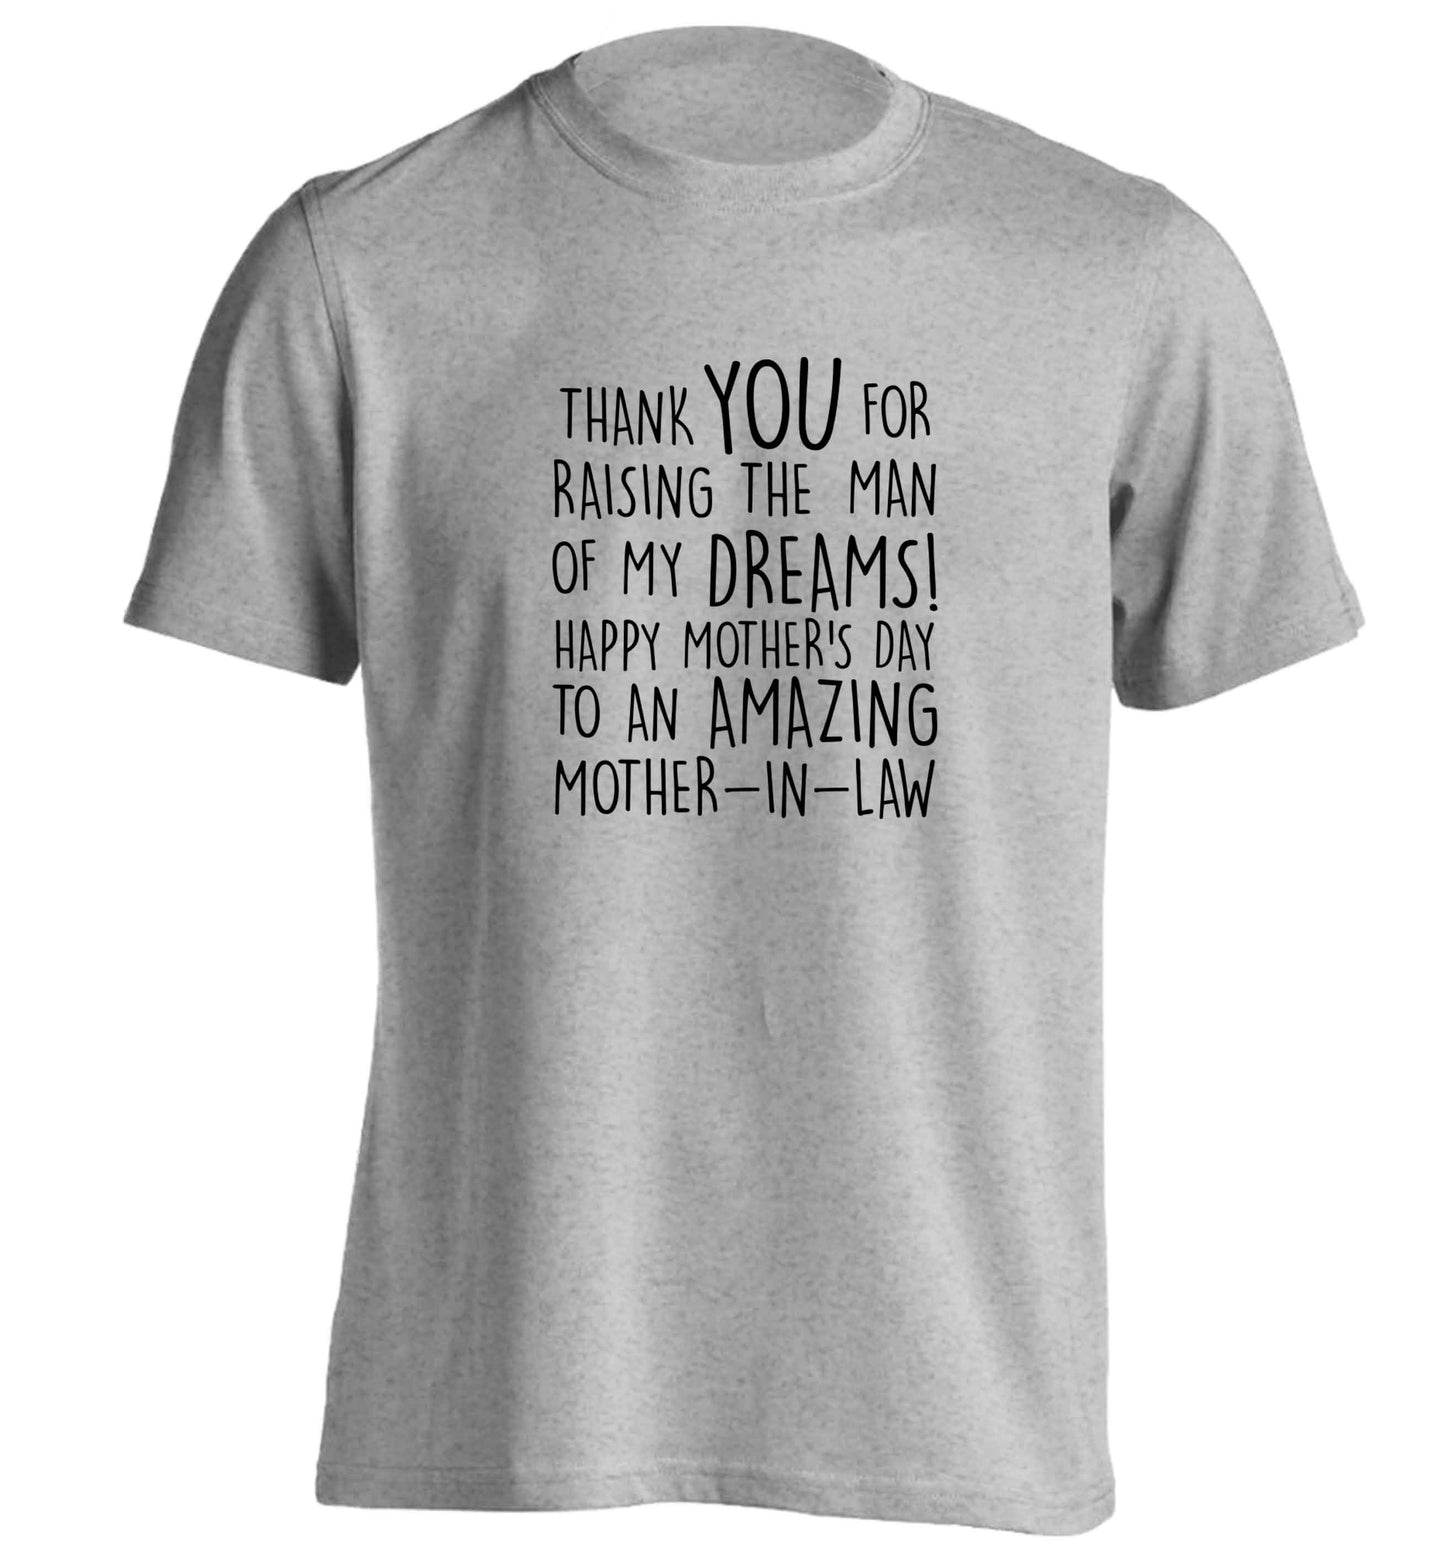 Raising the man of my dreams mother's day mother-in-law adults unisex grey Tshirt 2XL